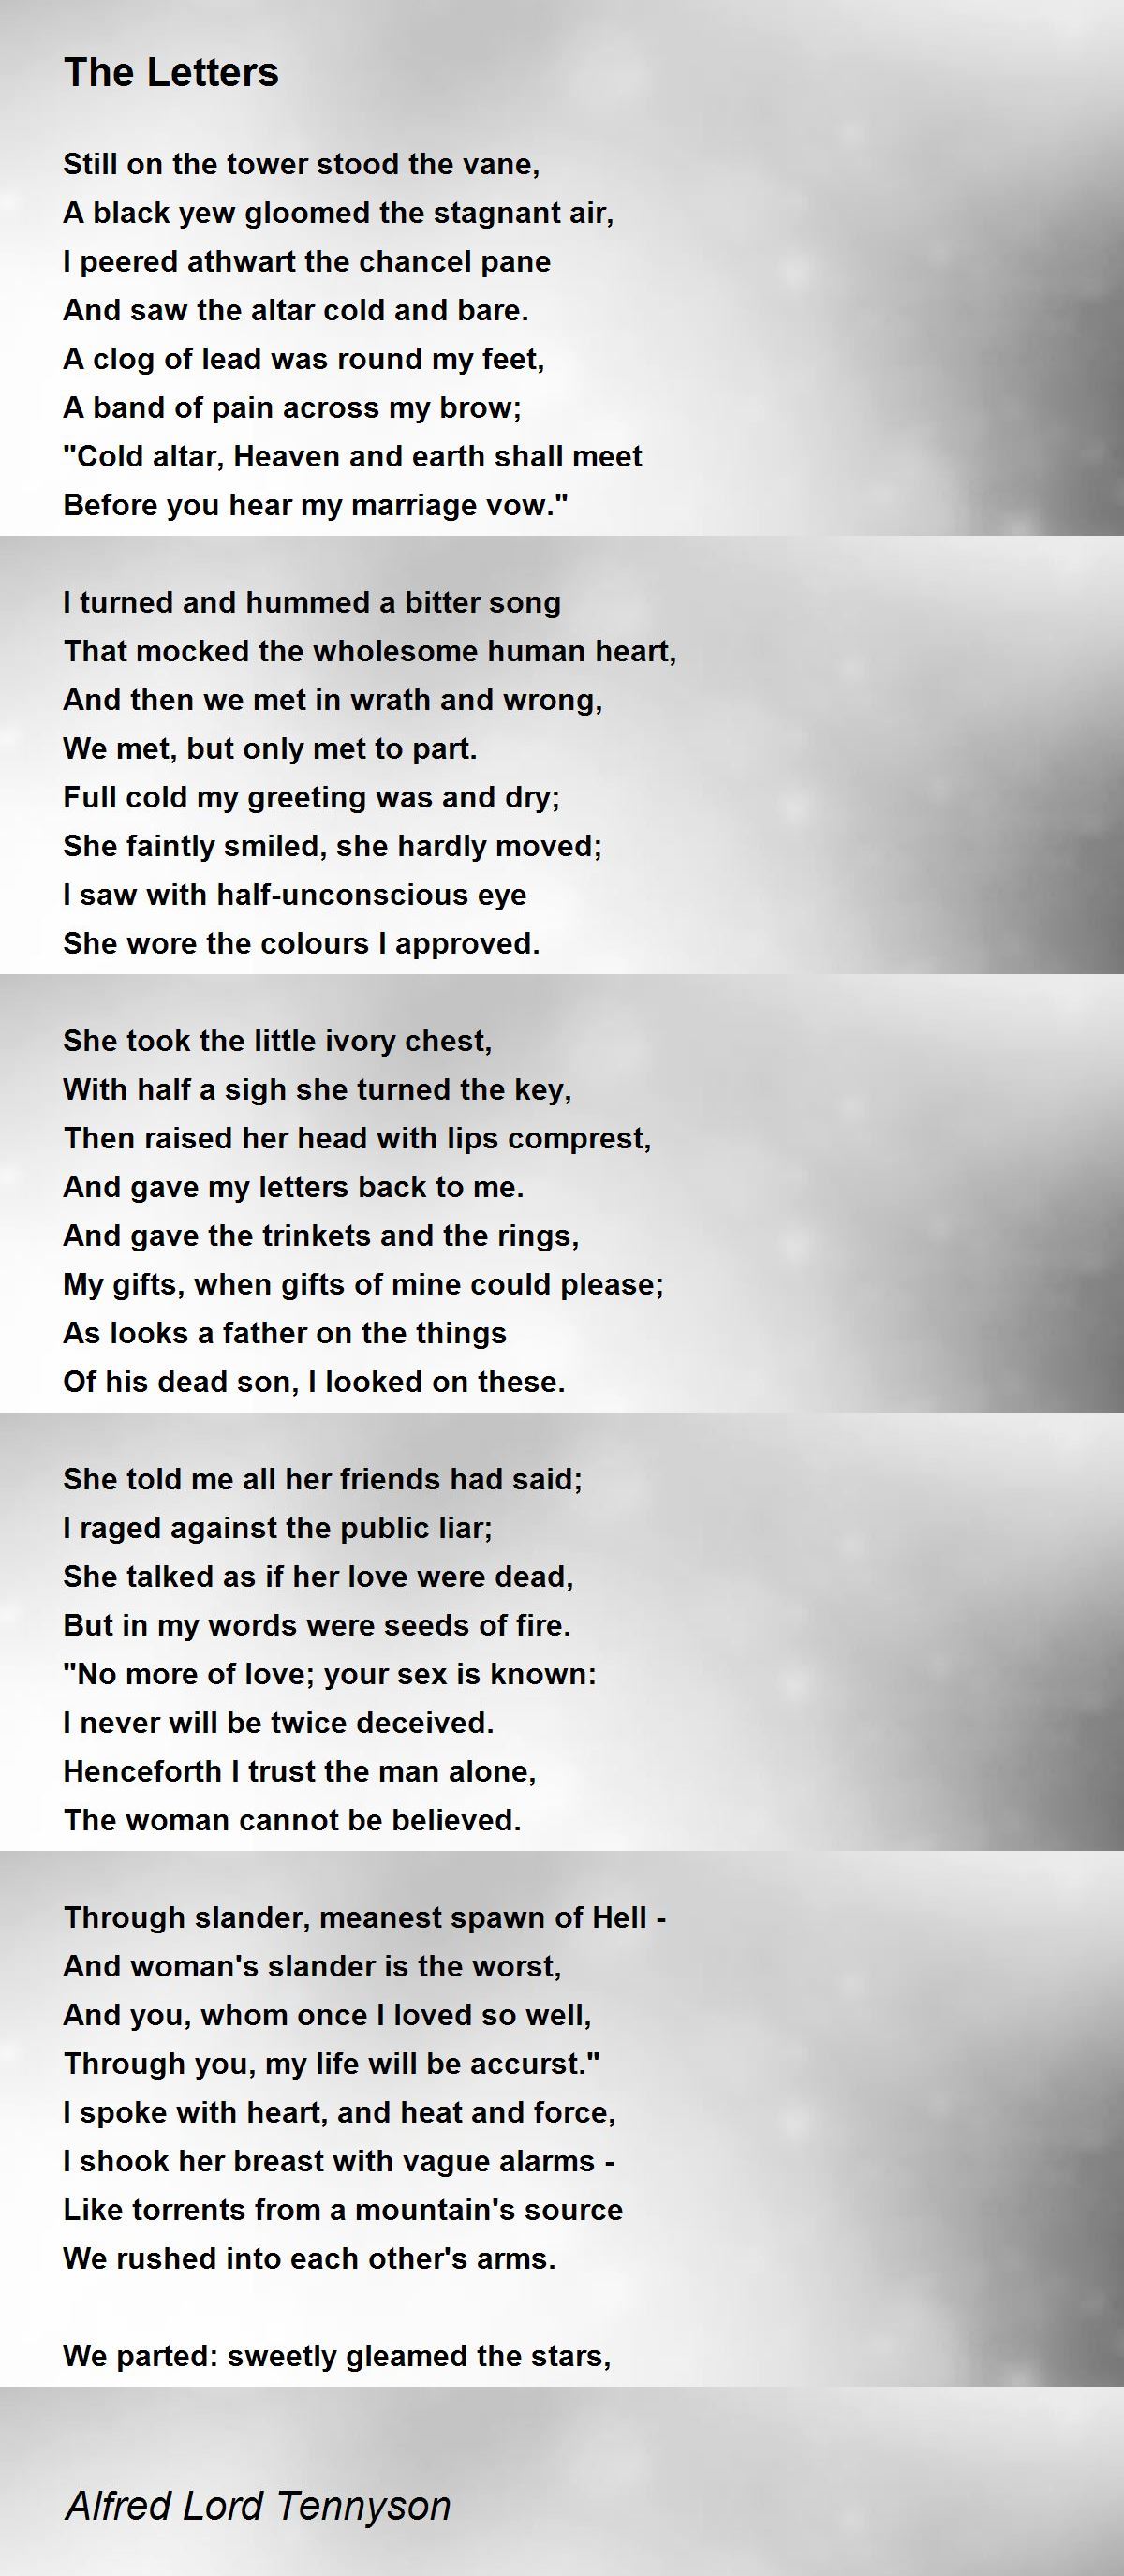 The Letters by Alfred Lord Tennyson - The Letters Poem